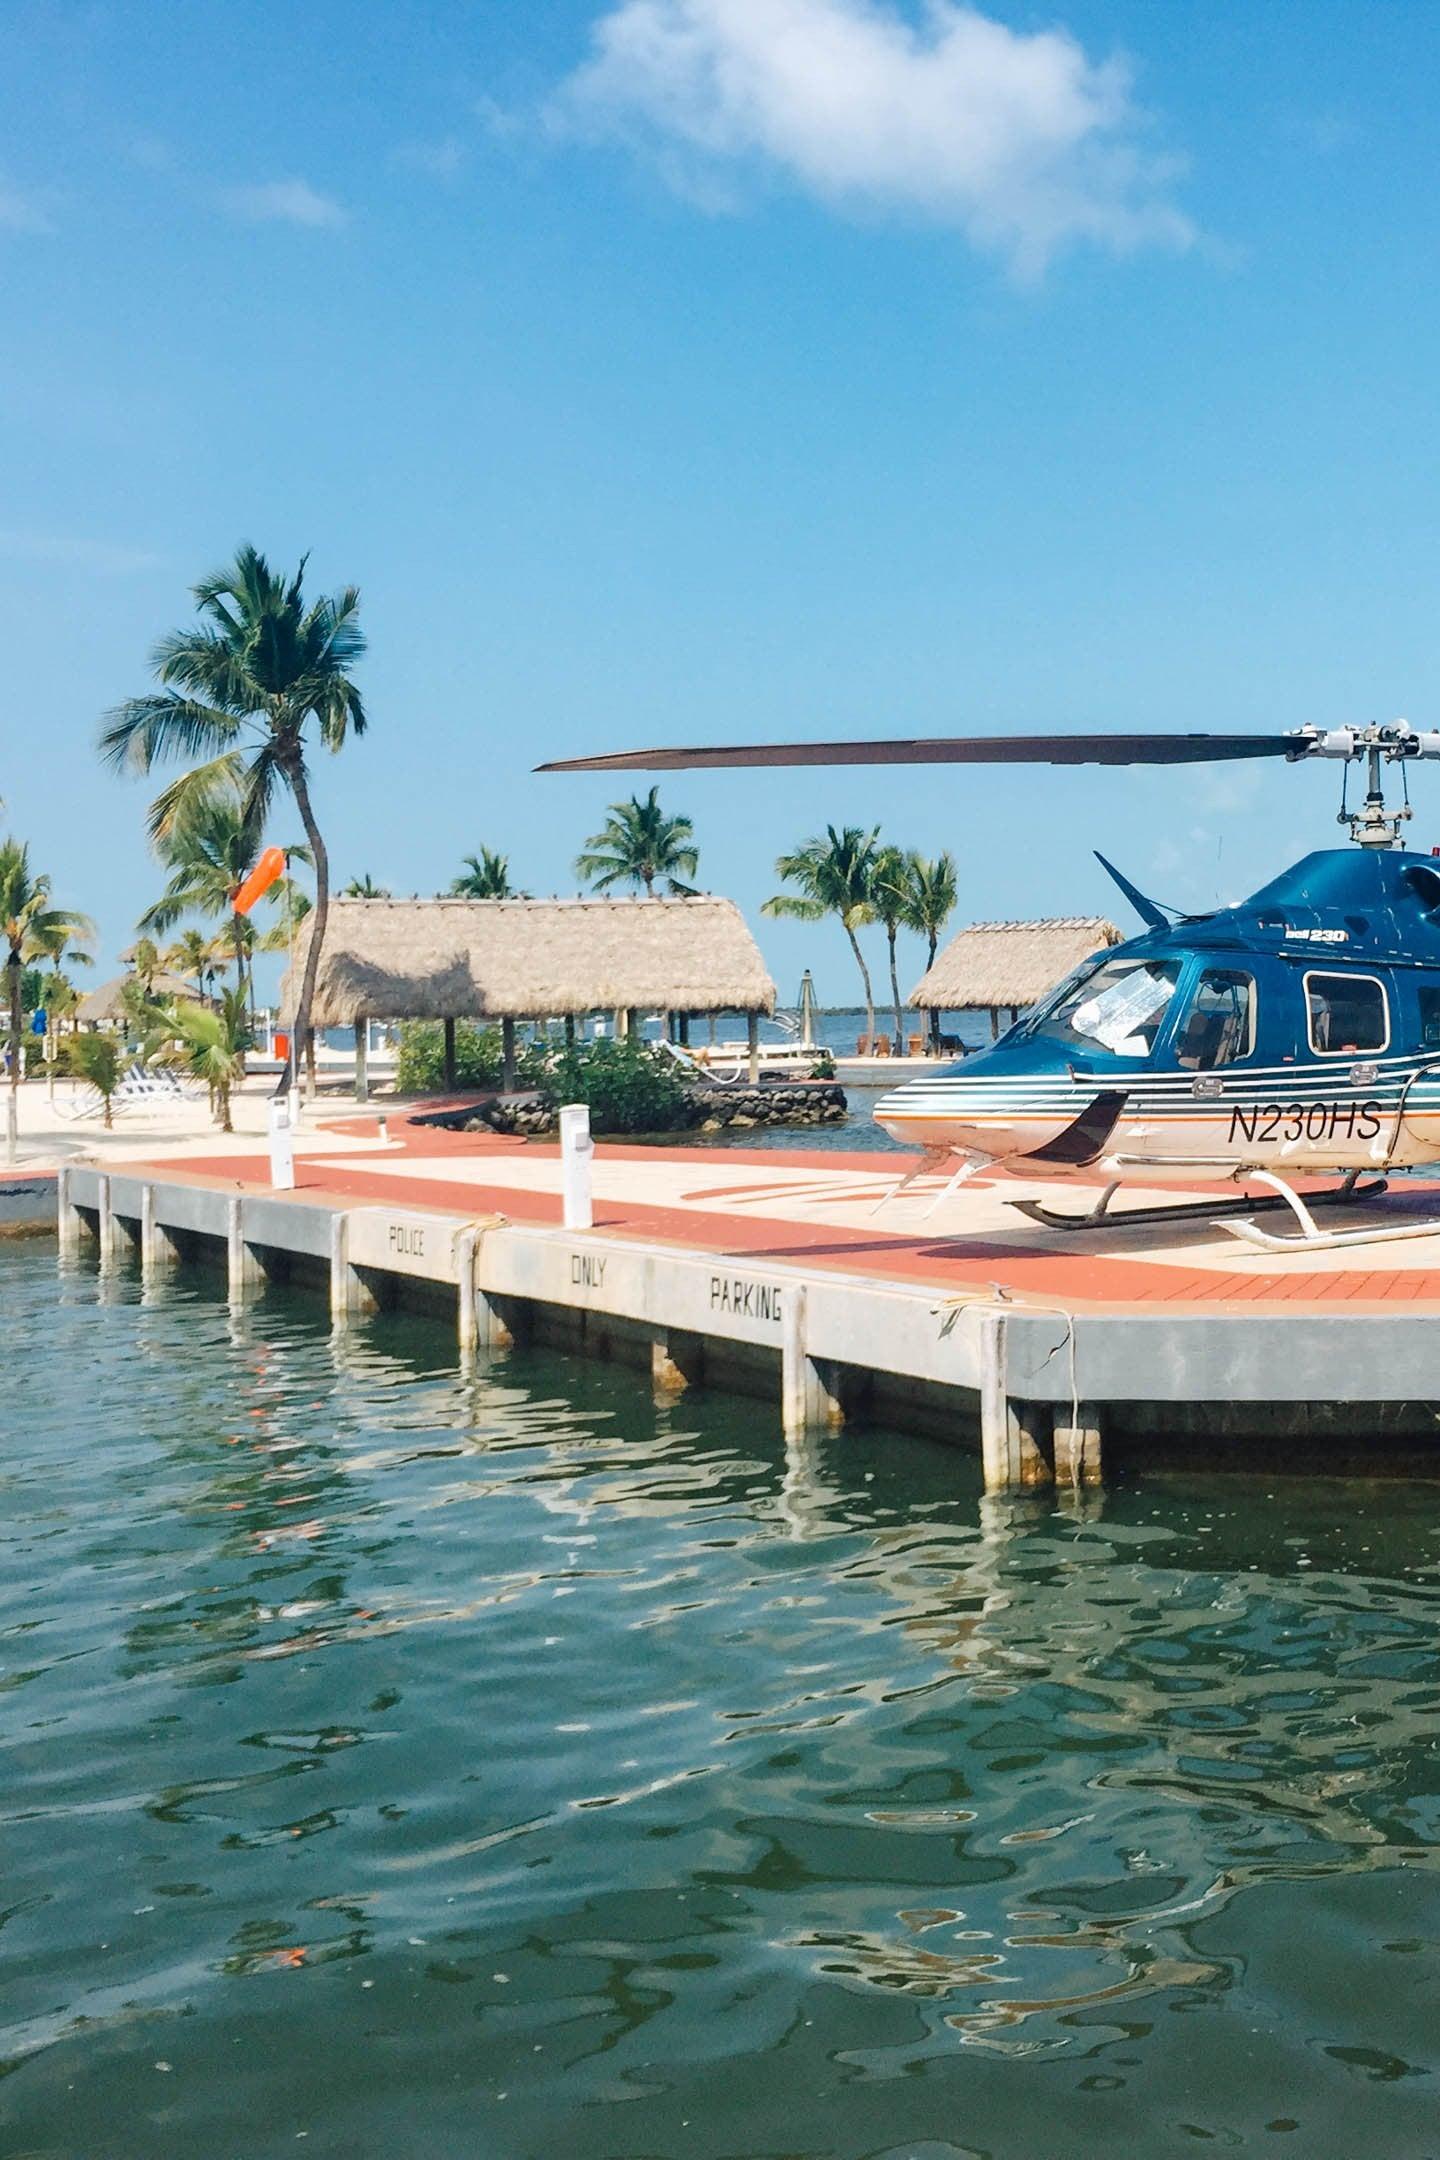 Pet Friendly Explore Key Largo by Helicopter